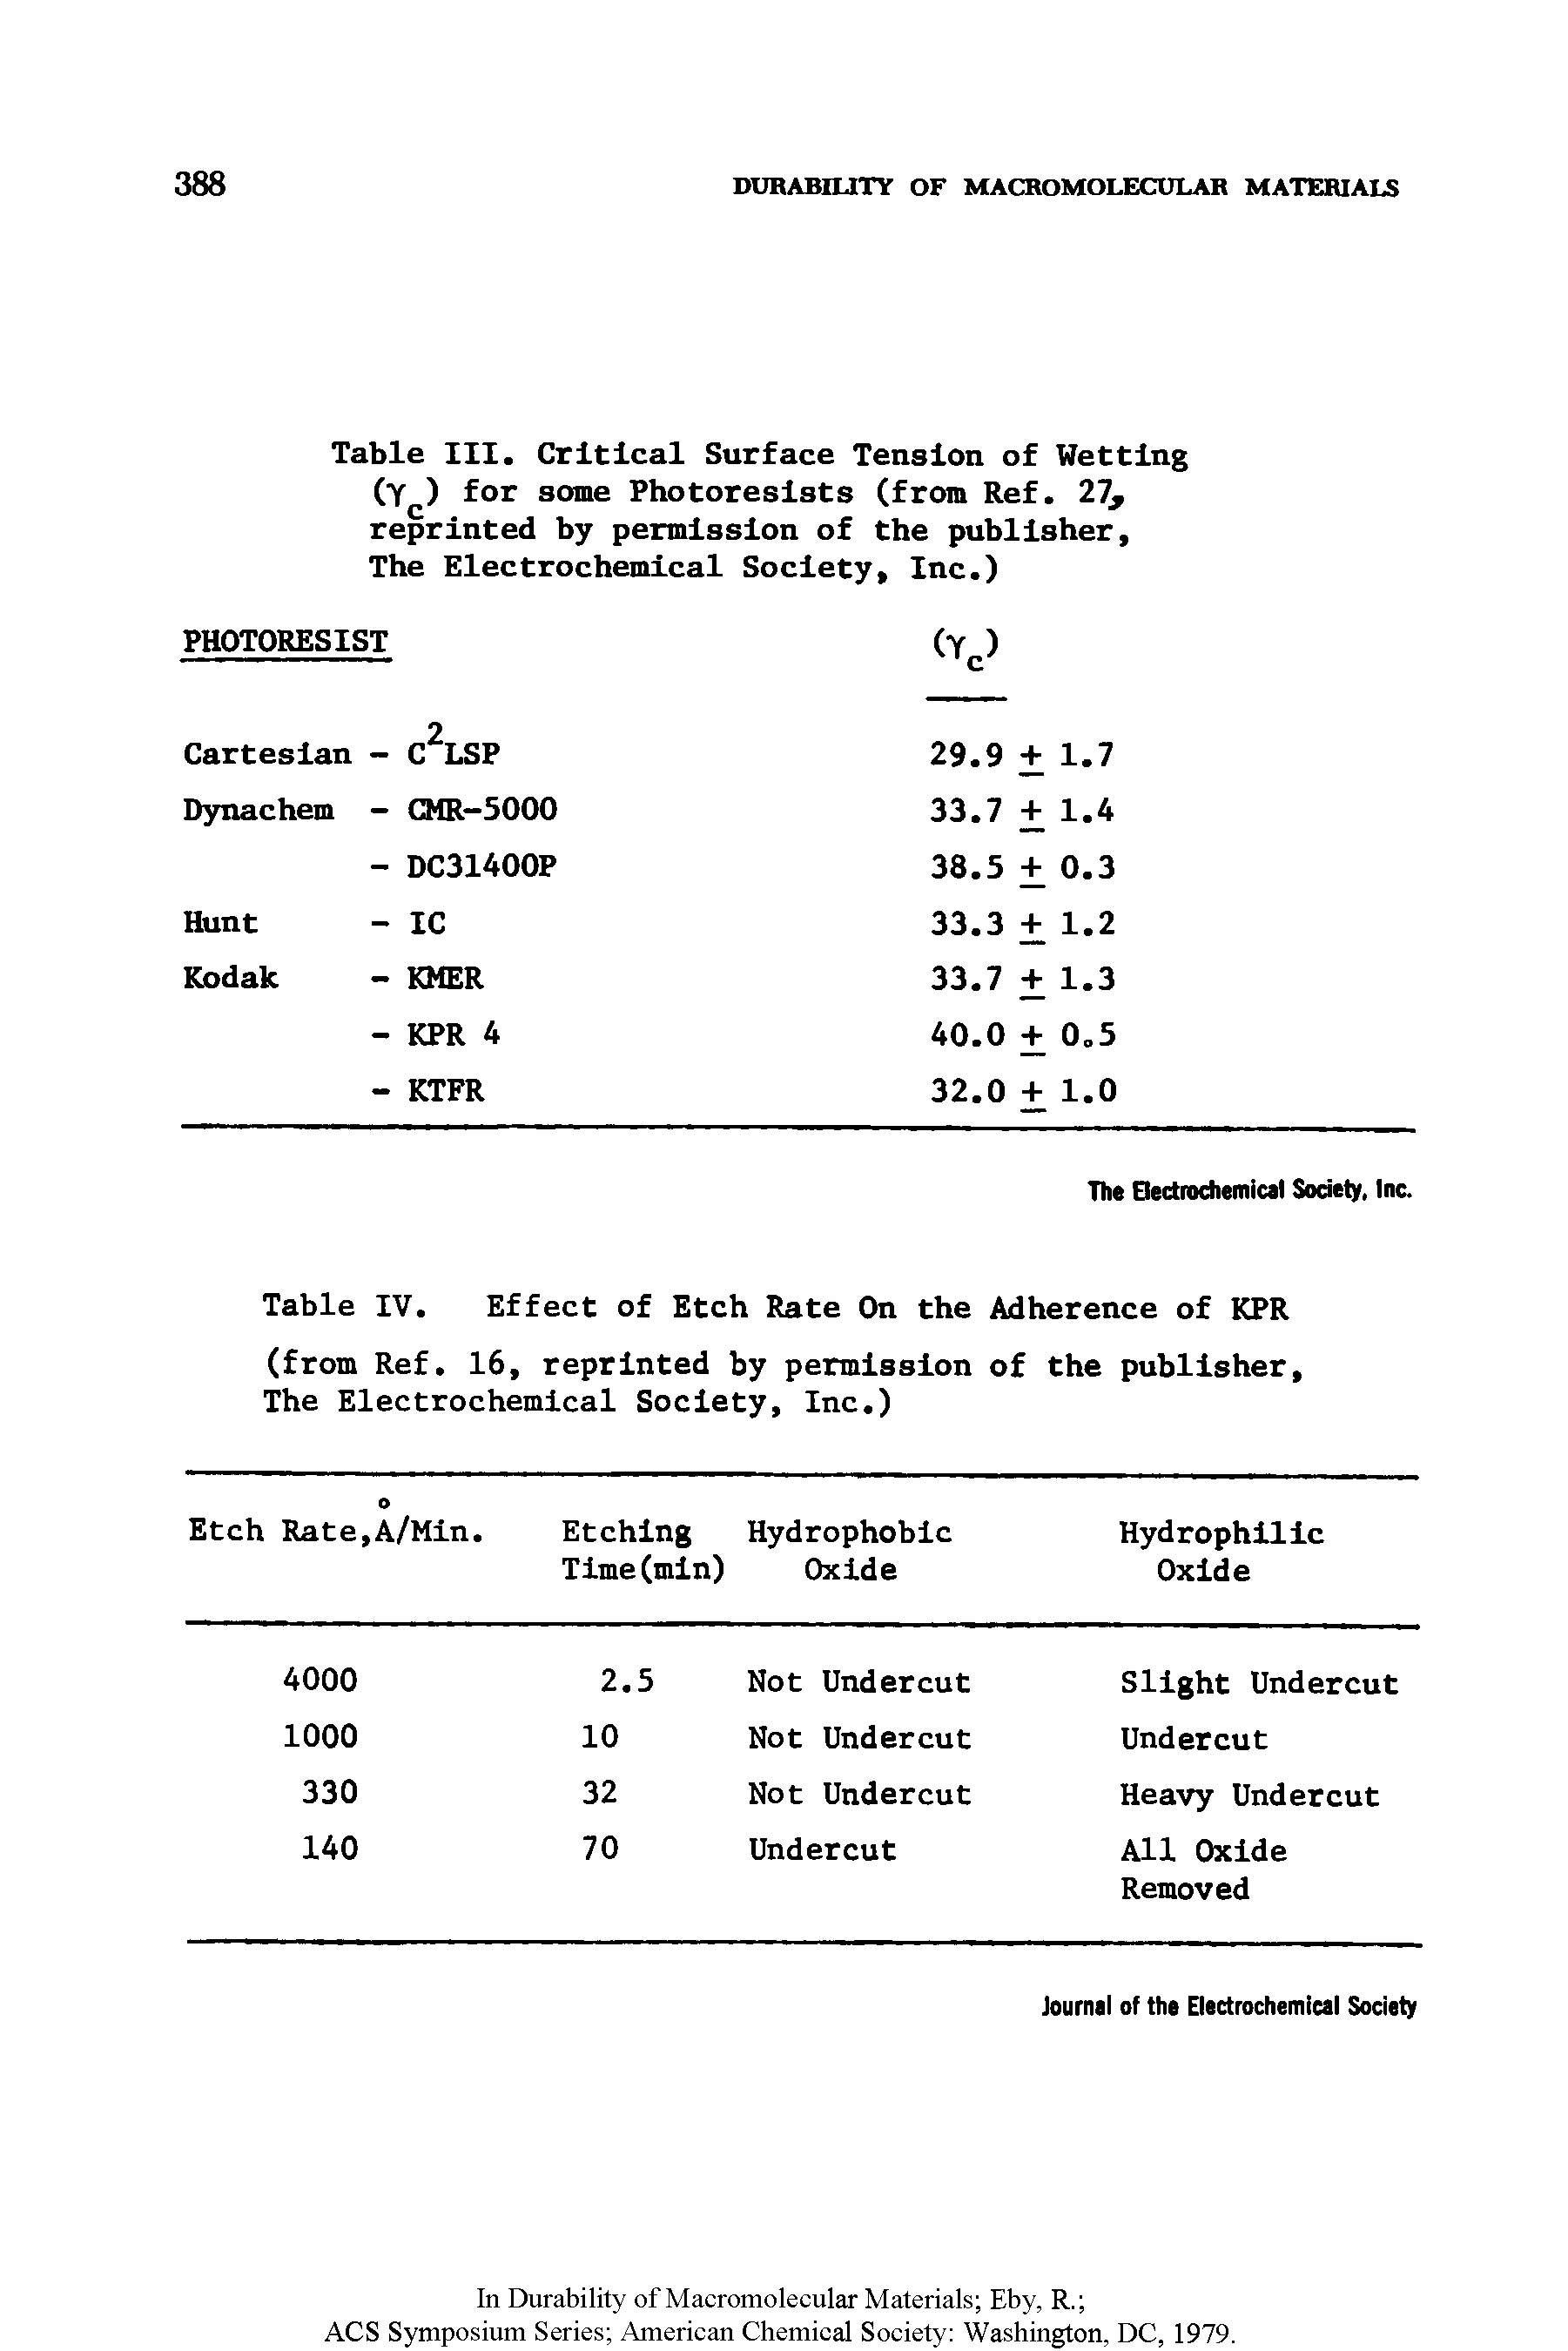 Table III. Critical Surface Tension of Wetting (Yj,) for some Photoresists (from Ref. 27, reprinted by permission of the publisher.